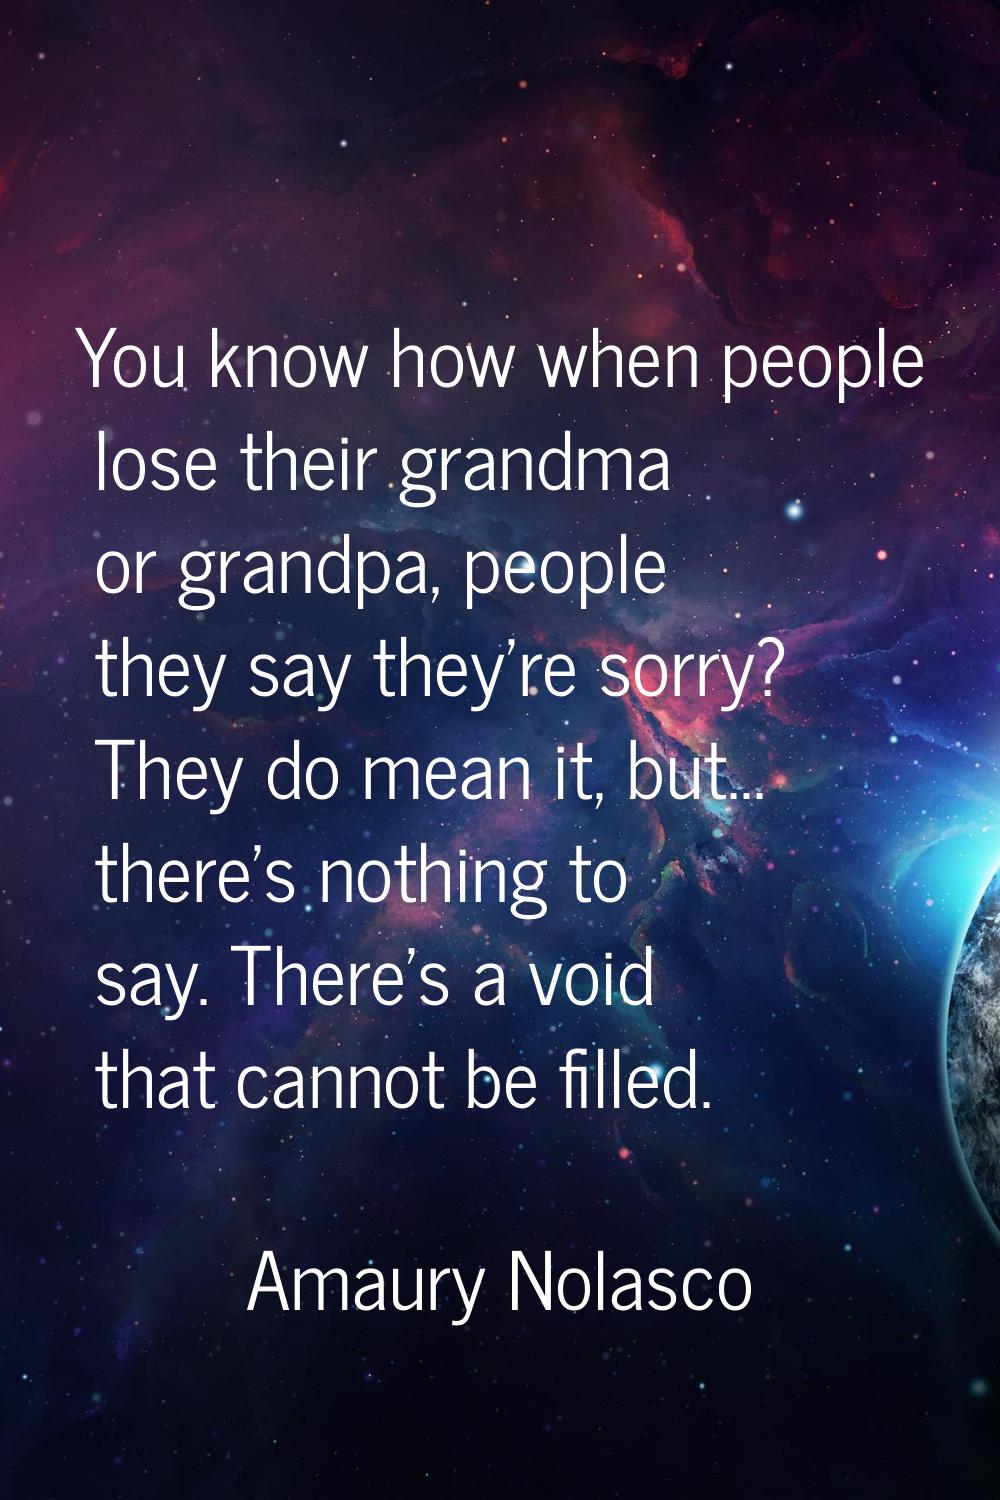 You know how when people lose their grandma or grandpa, people they say they're sorry? They do mean